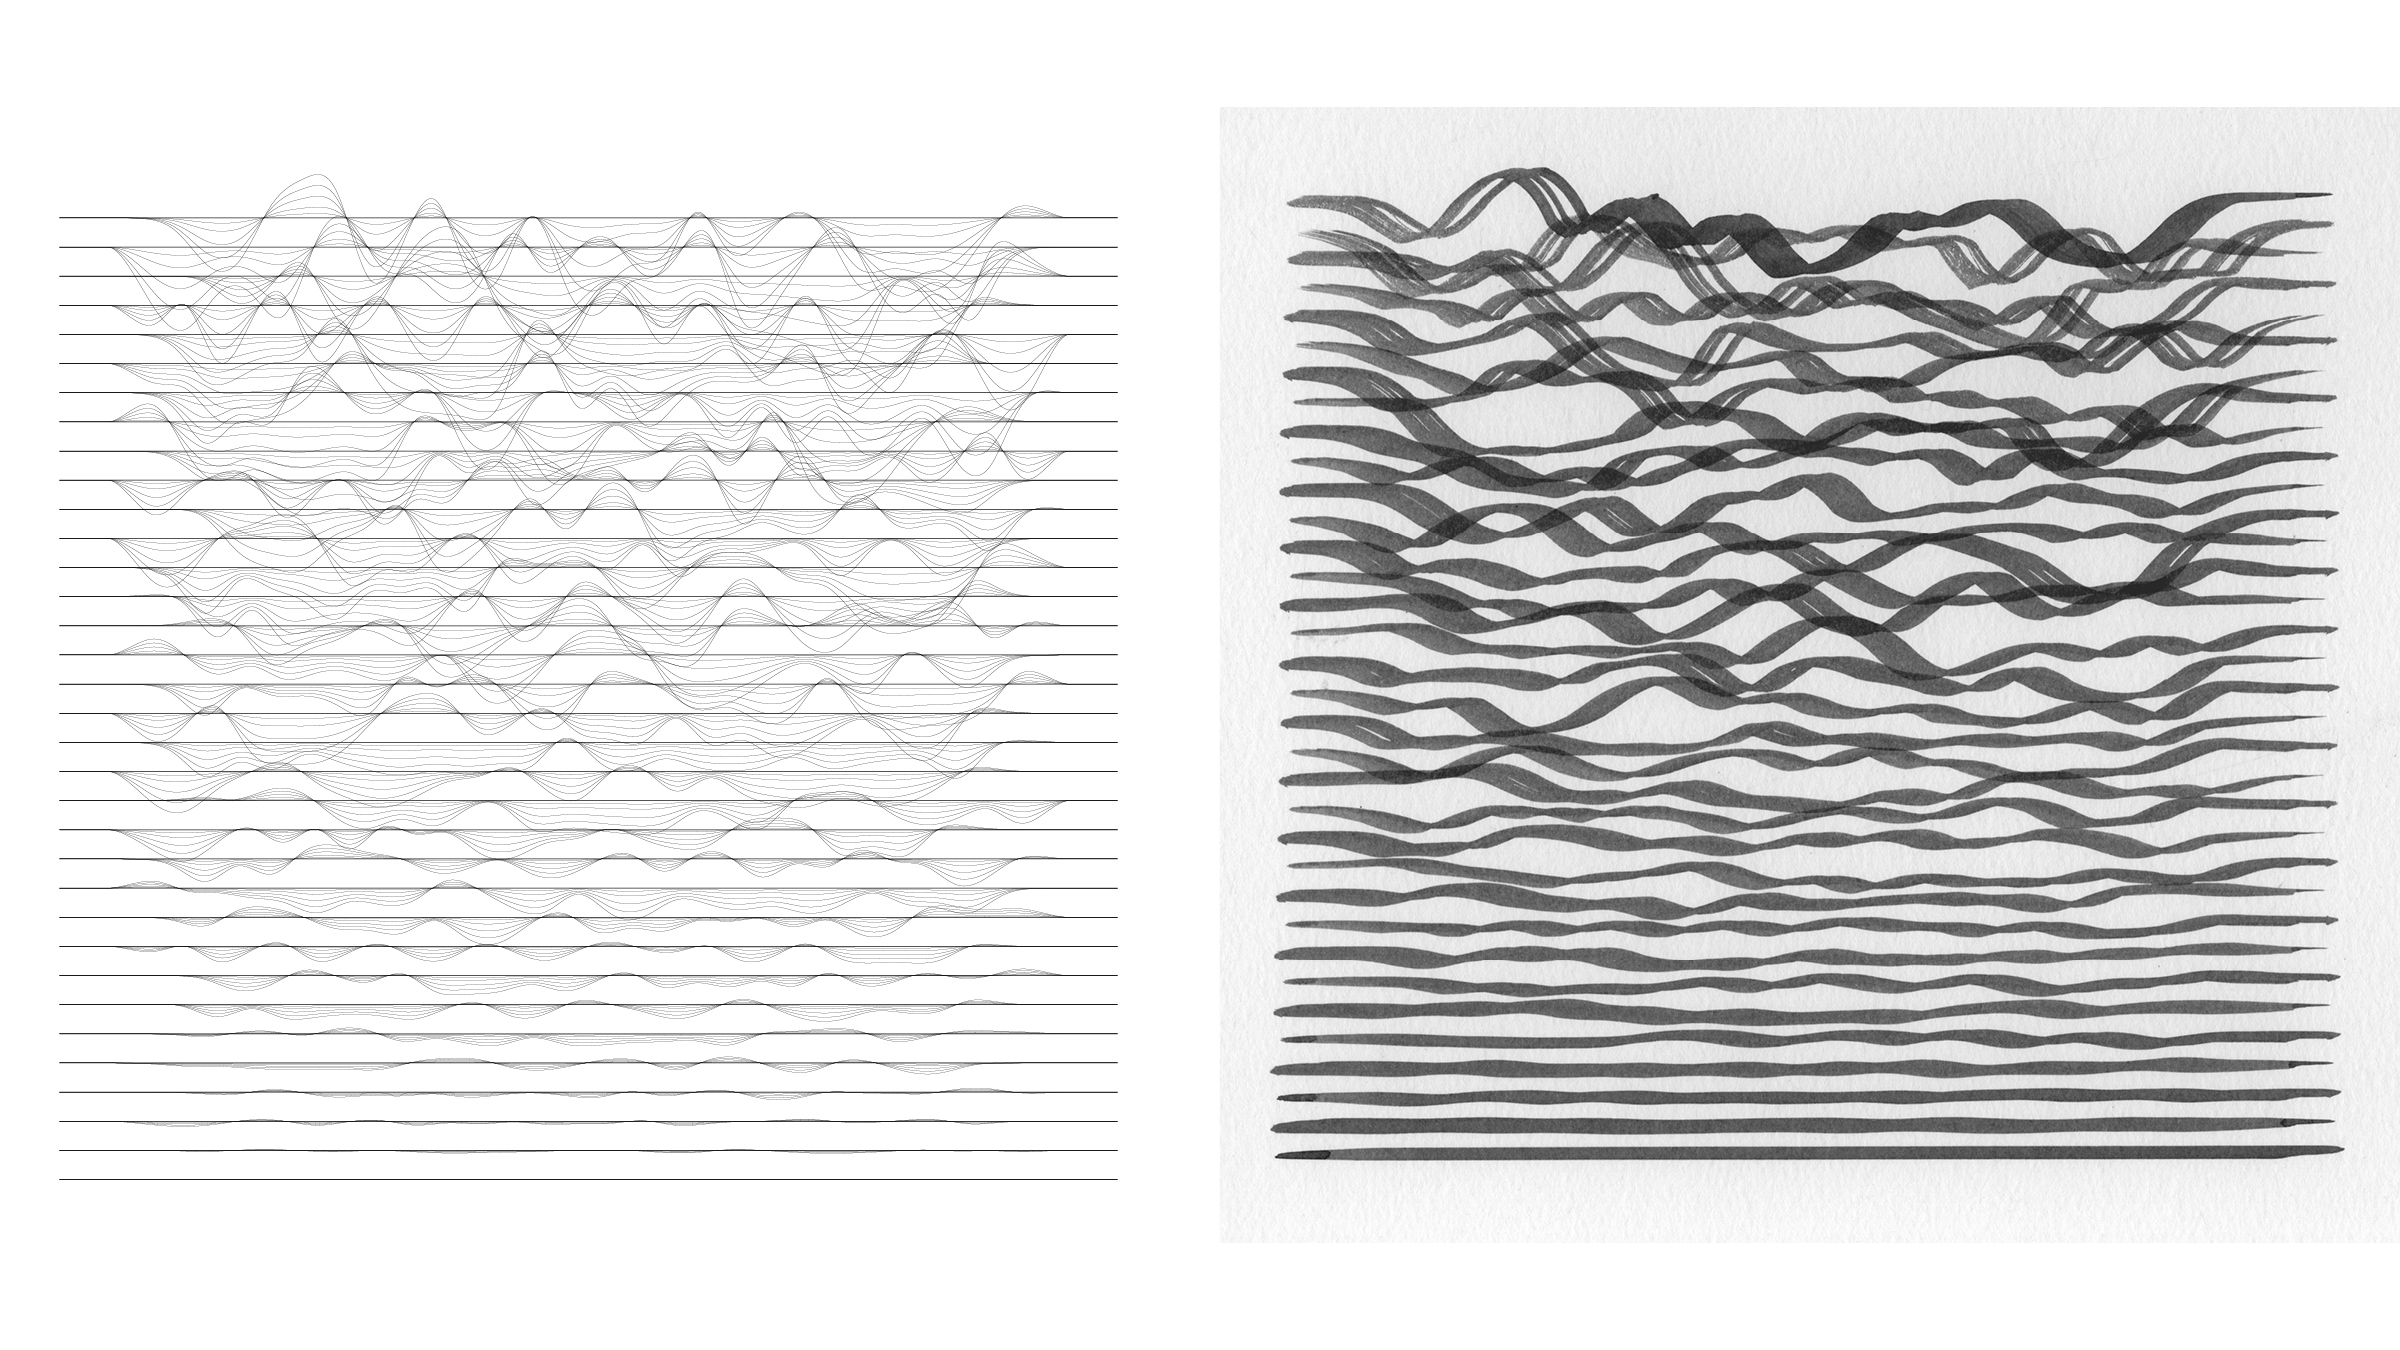   Waves , Seed 28, Toolpaths (left) and Increment 100 (right)    